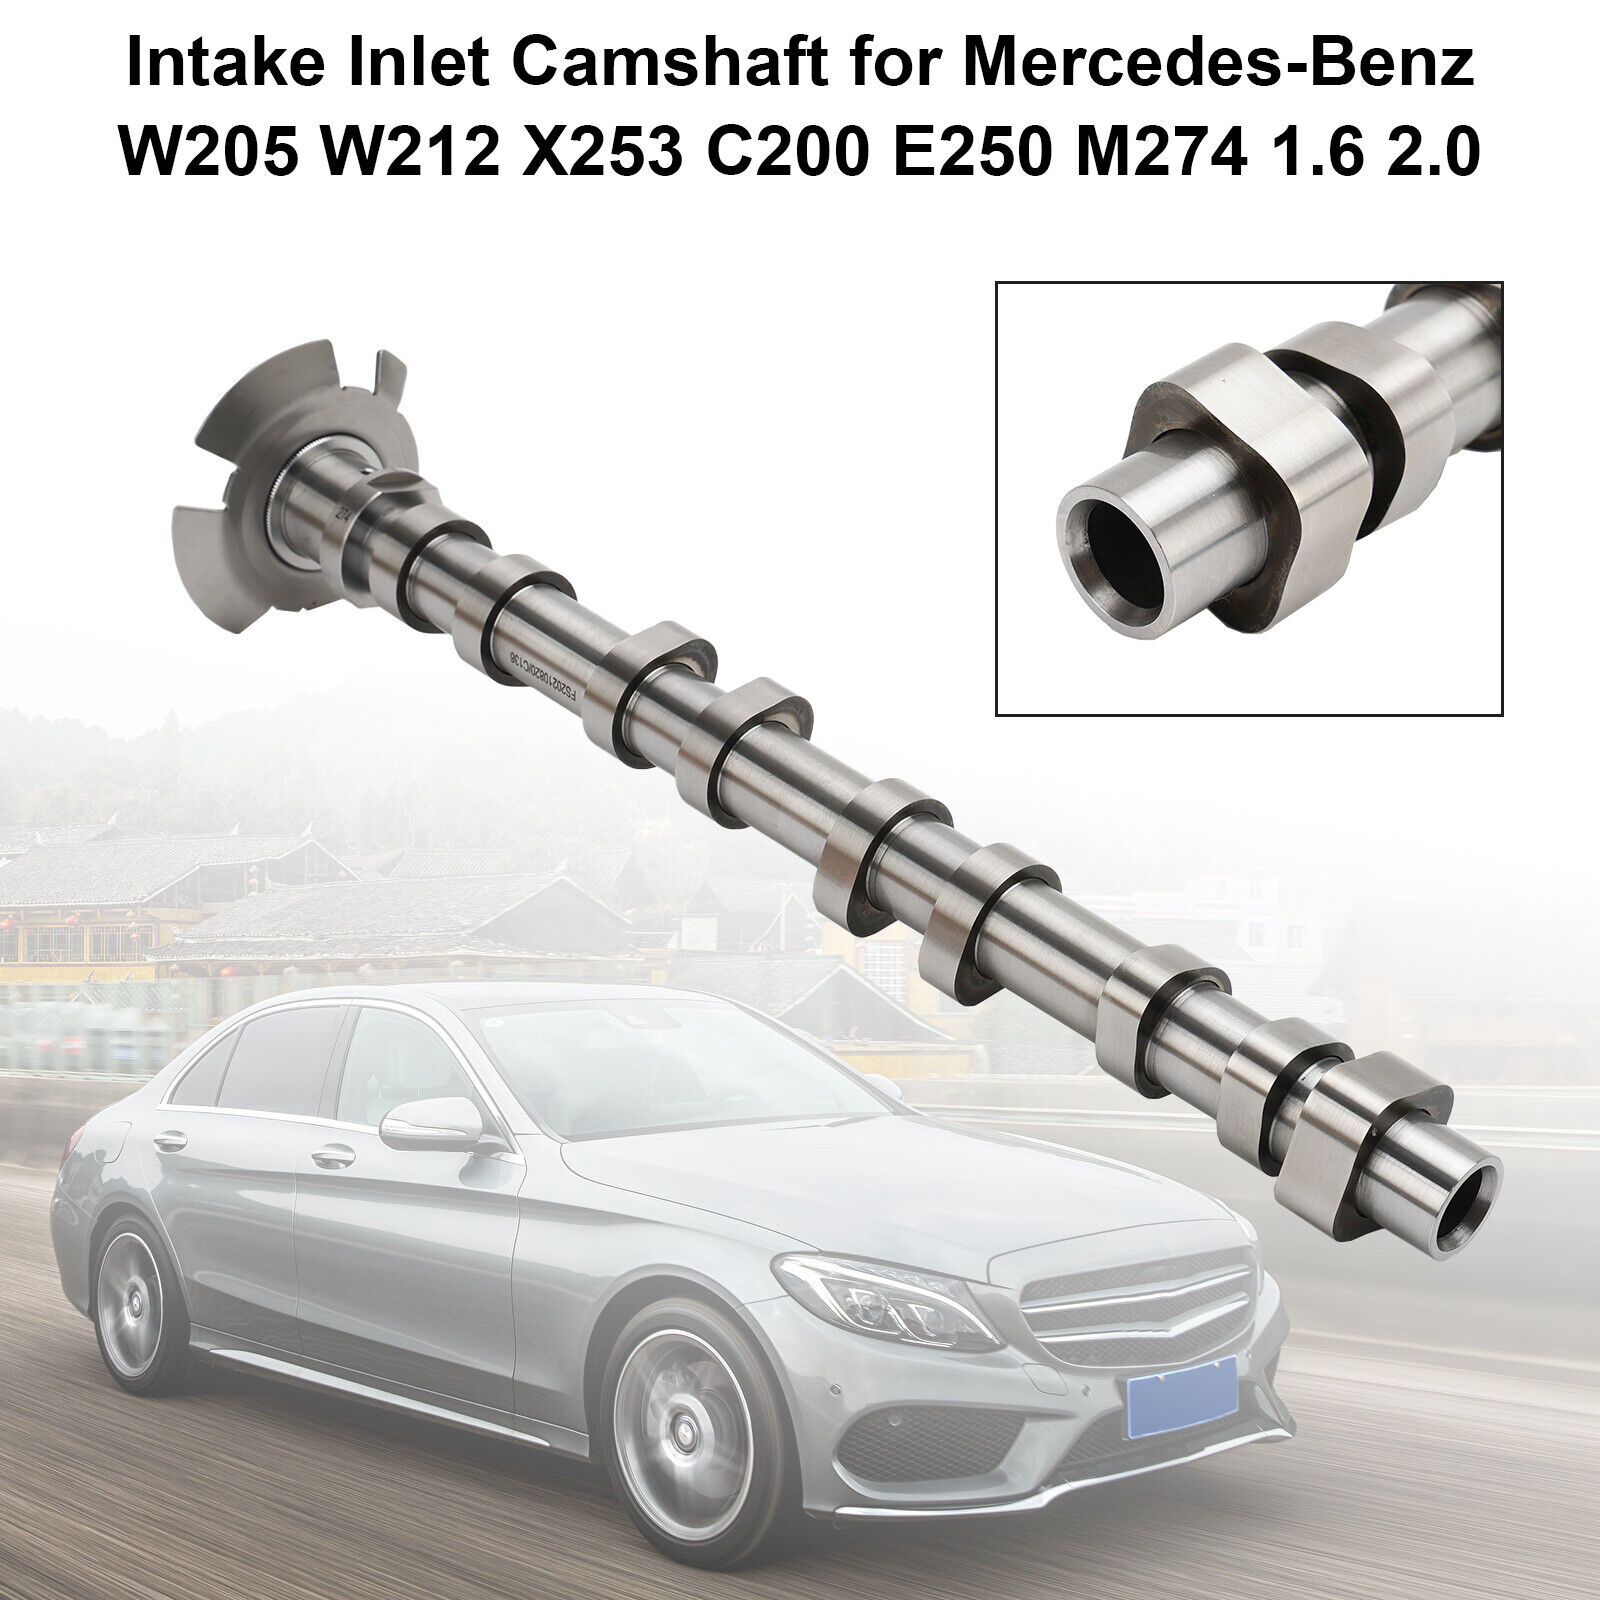 Intake Inlet Camshaft for Mercedes-Benz W205 W212 X253 C200 E250 M274 1.6 2 T07